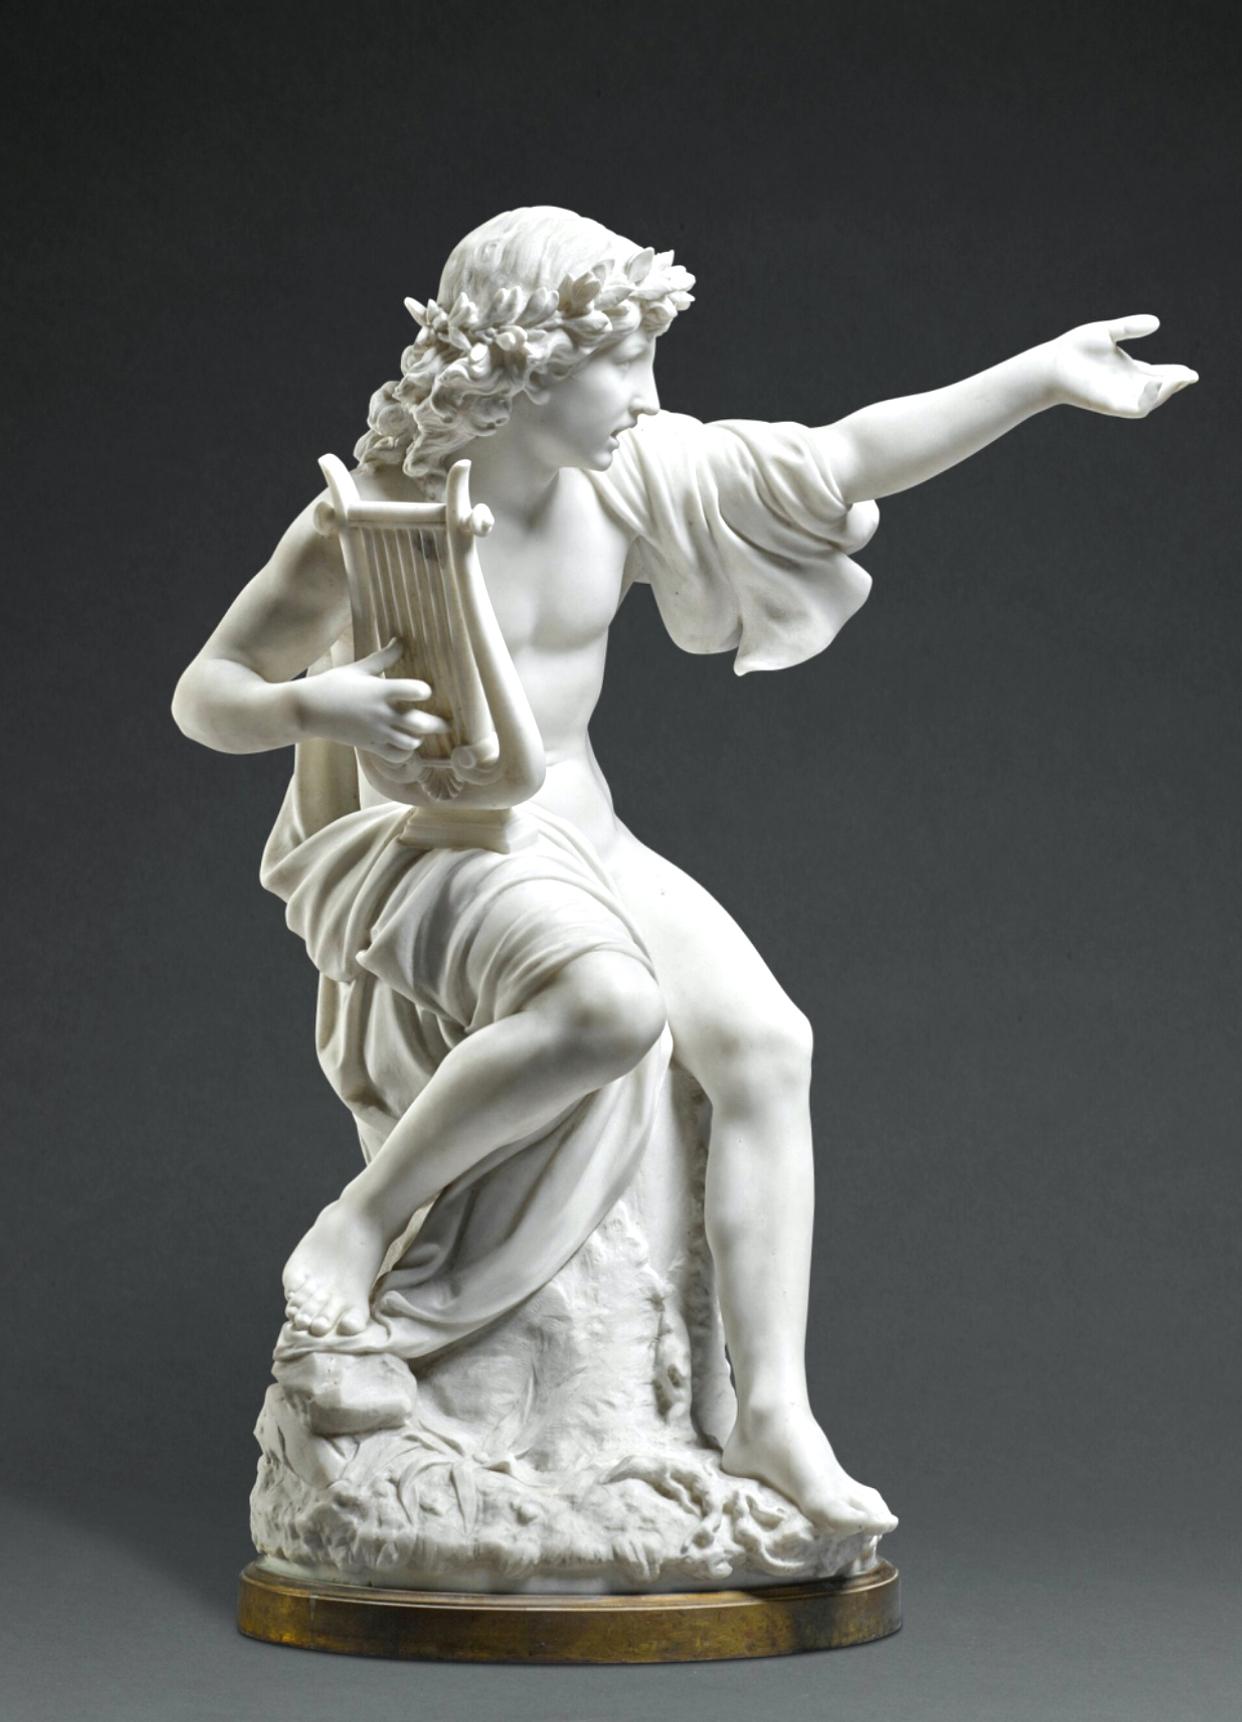 Unique Carrara white marble finely carved sculpture of Orpheus , Mythological personification of the eternal love and art.
Henry Dasson French
1825 - 1896 Orpheus 
white marble, on a gilt bronze base 75.5cm., 29 3/4 in. overall 
The renowned